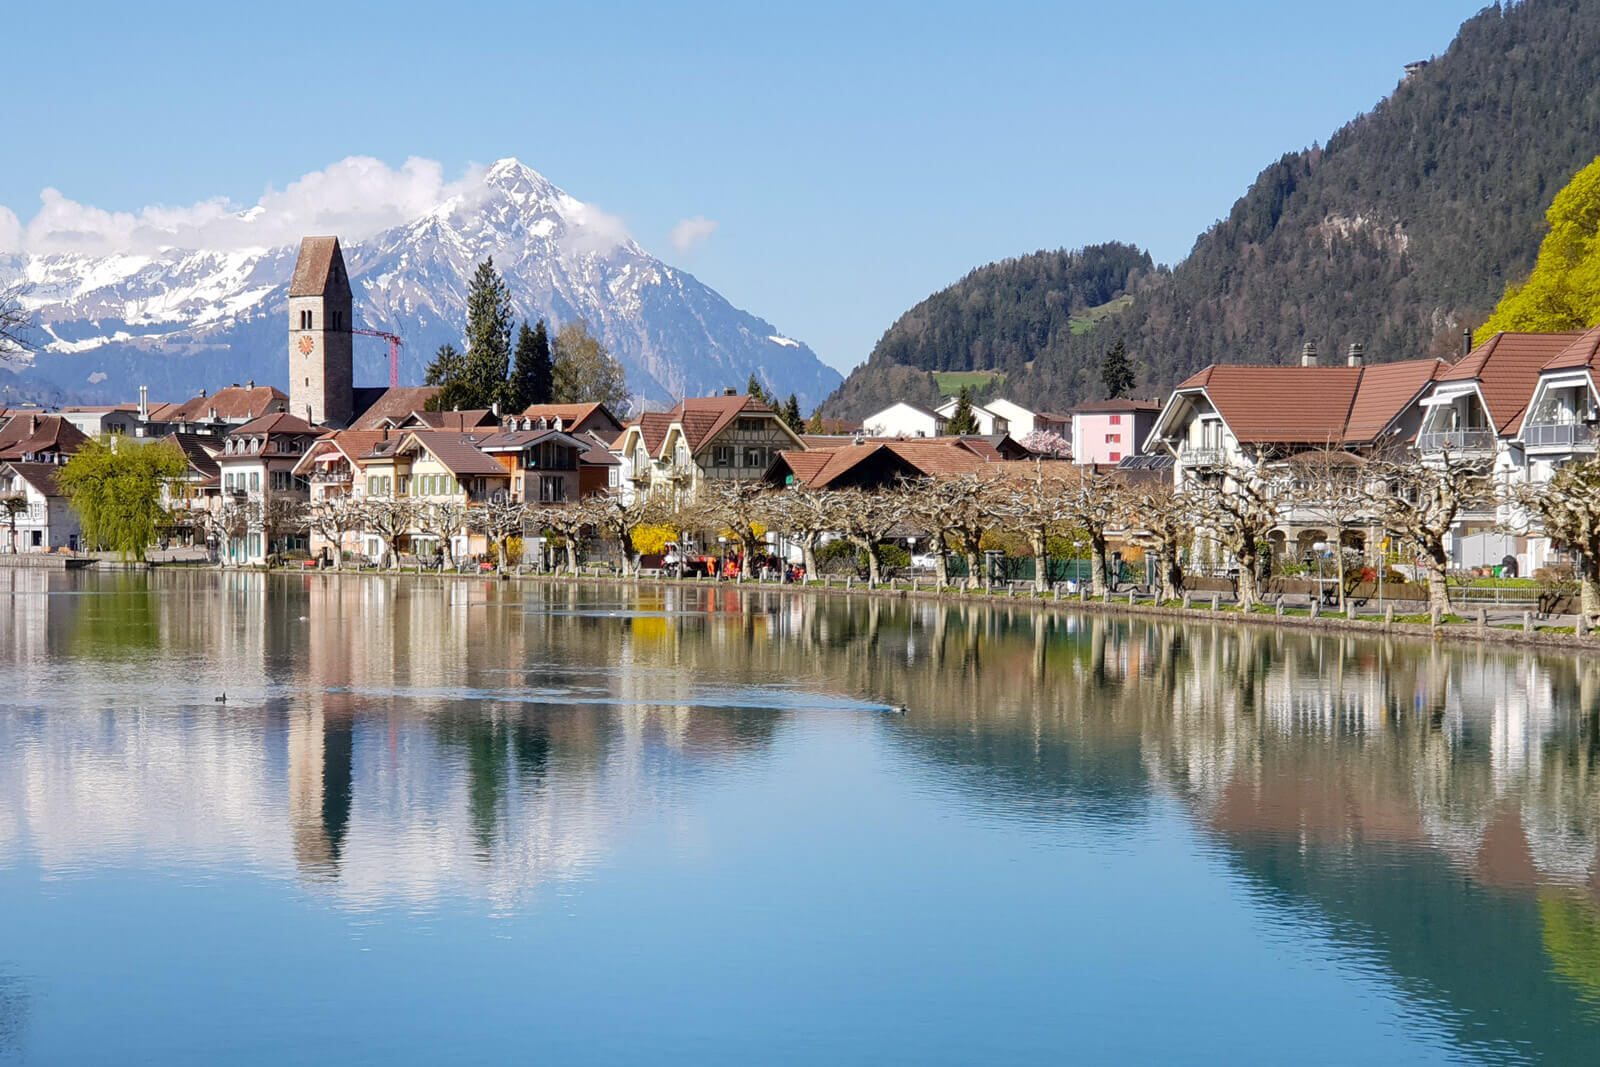 How to get the most out of Interlaken, Switzerland